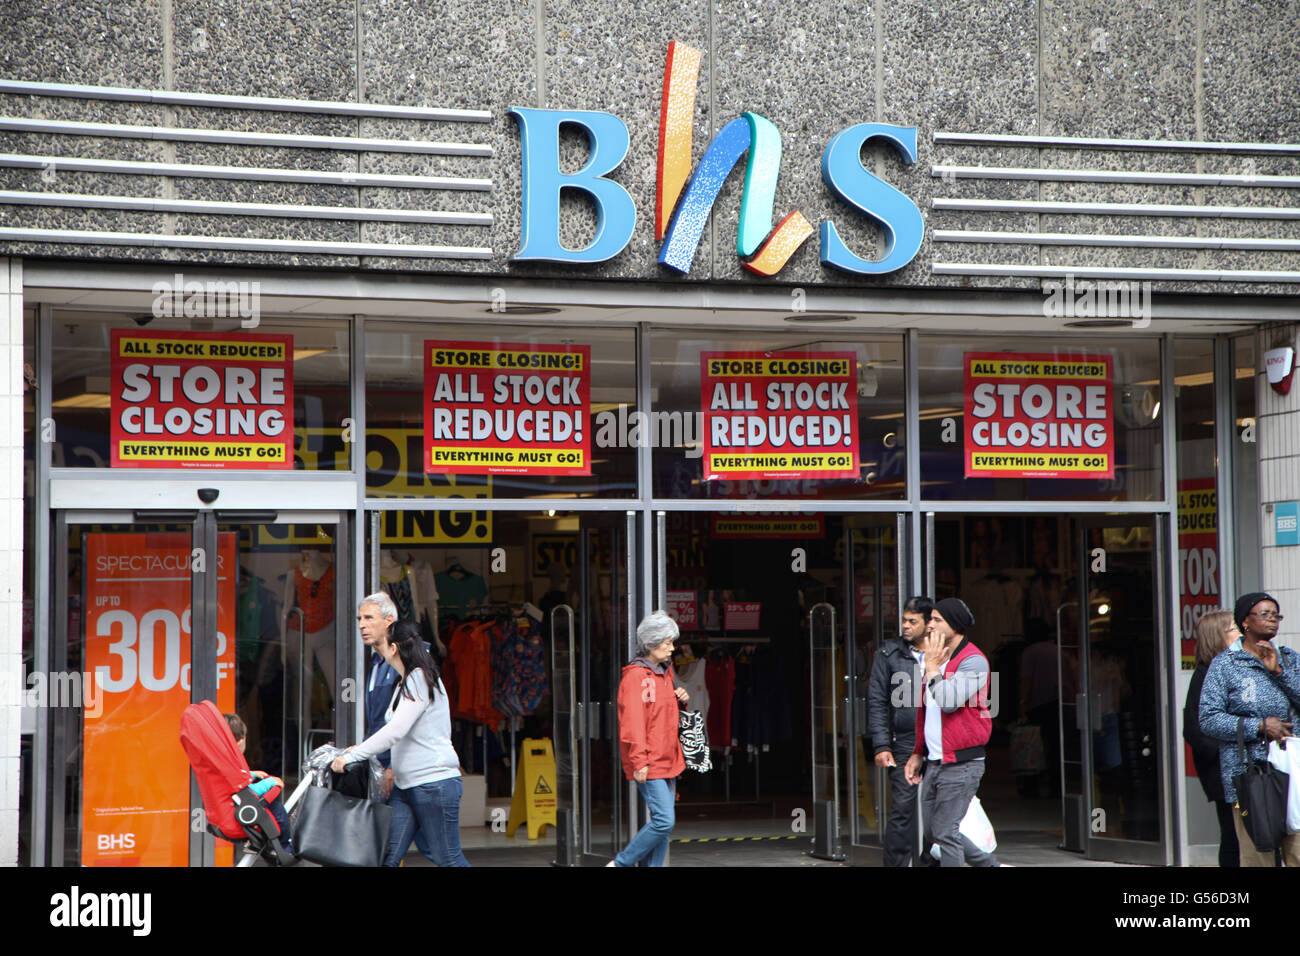 Wood Green, London, UK. 20th June, 2016. The BHS  (British Home Stores) store in Wood Green is closing down with all stock reduced sign displays on the shop window, after the group went into administration. Credit:  Dinendra Haria/Alamy Live News Stock Photo